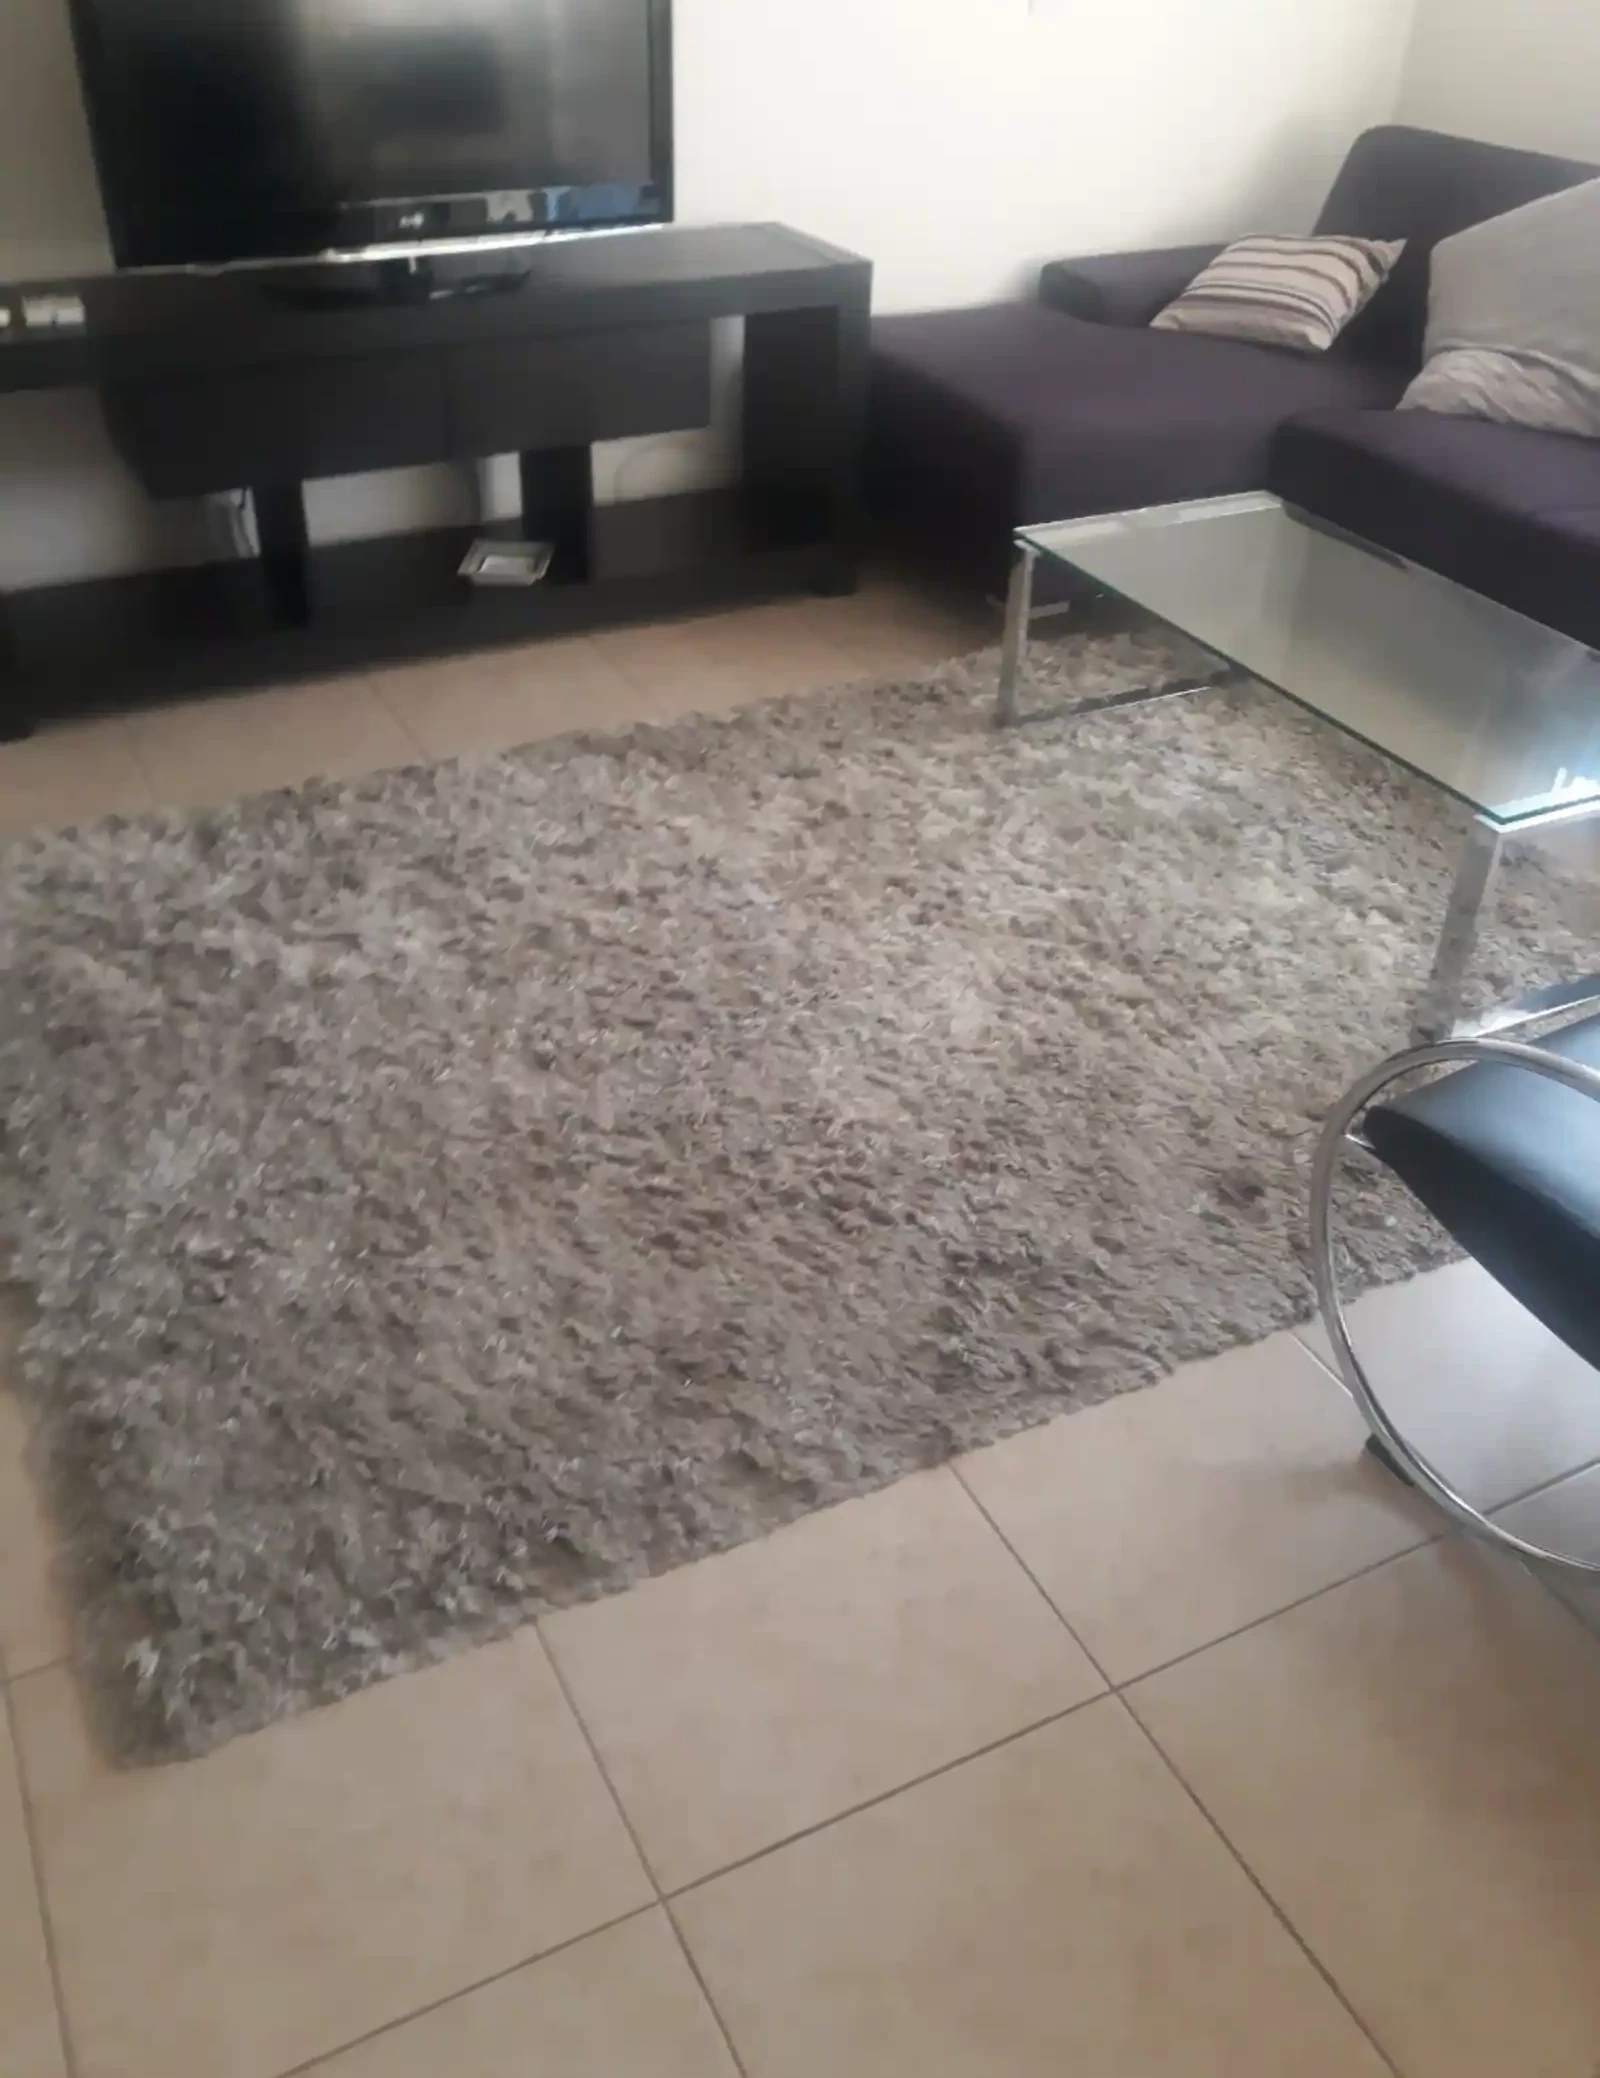 3-bedroom apartment to rent €1.850, image 1